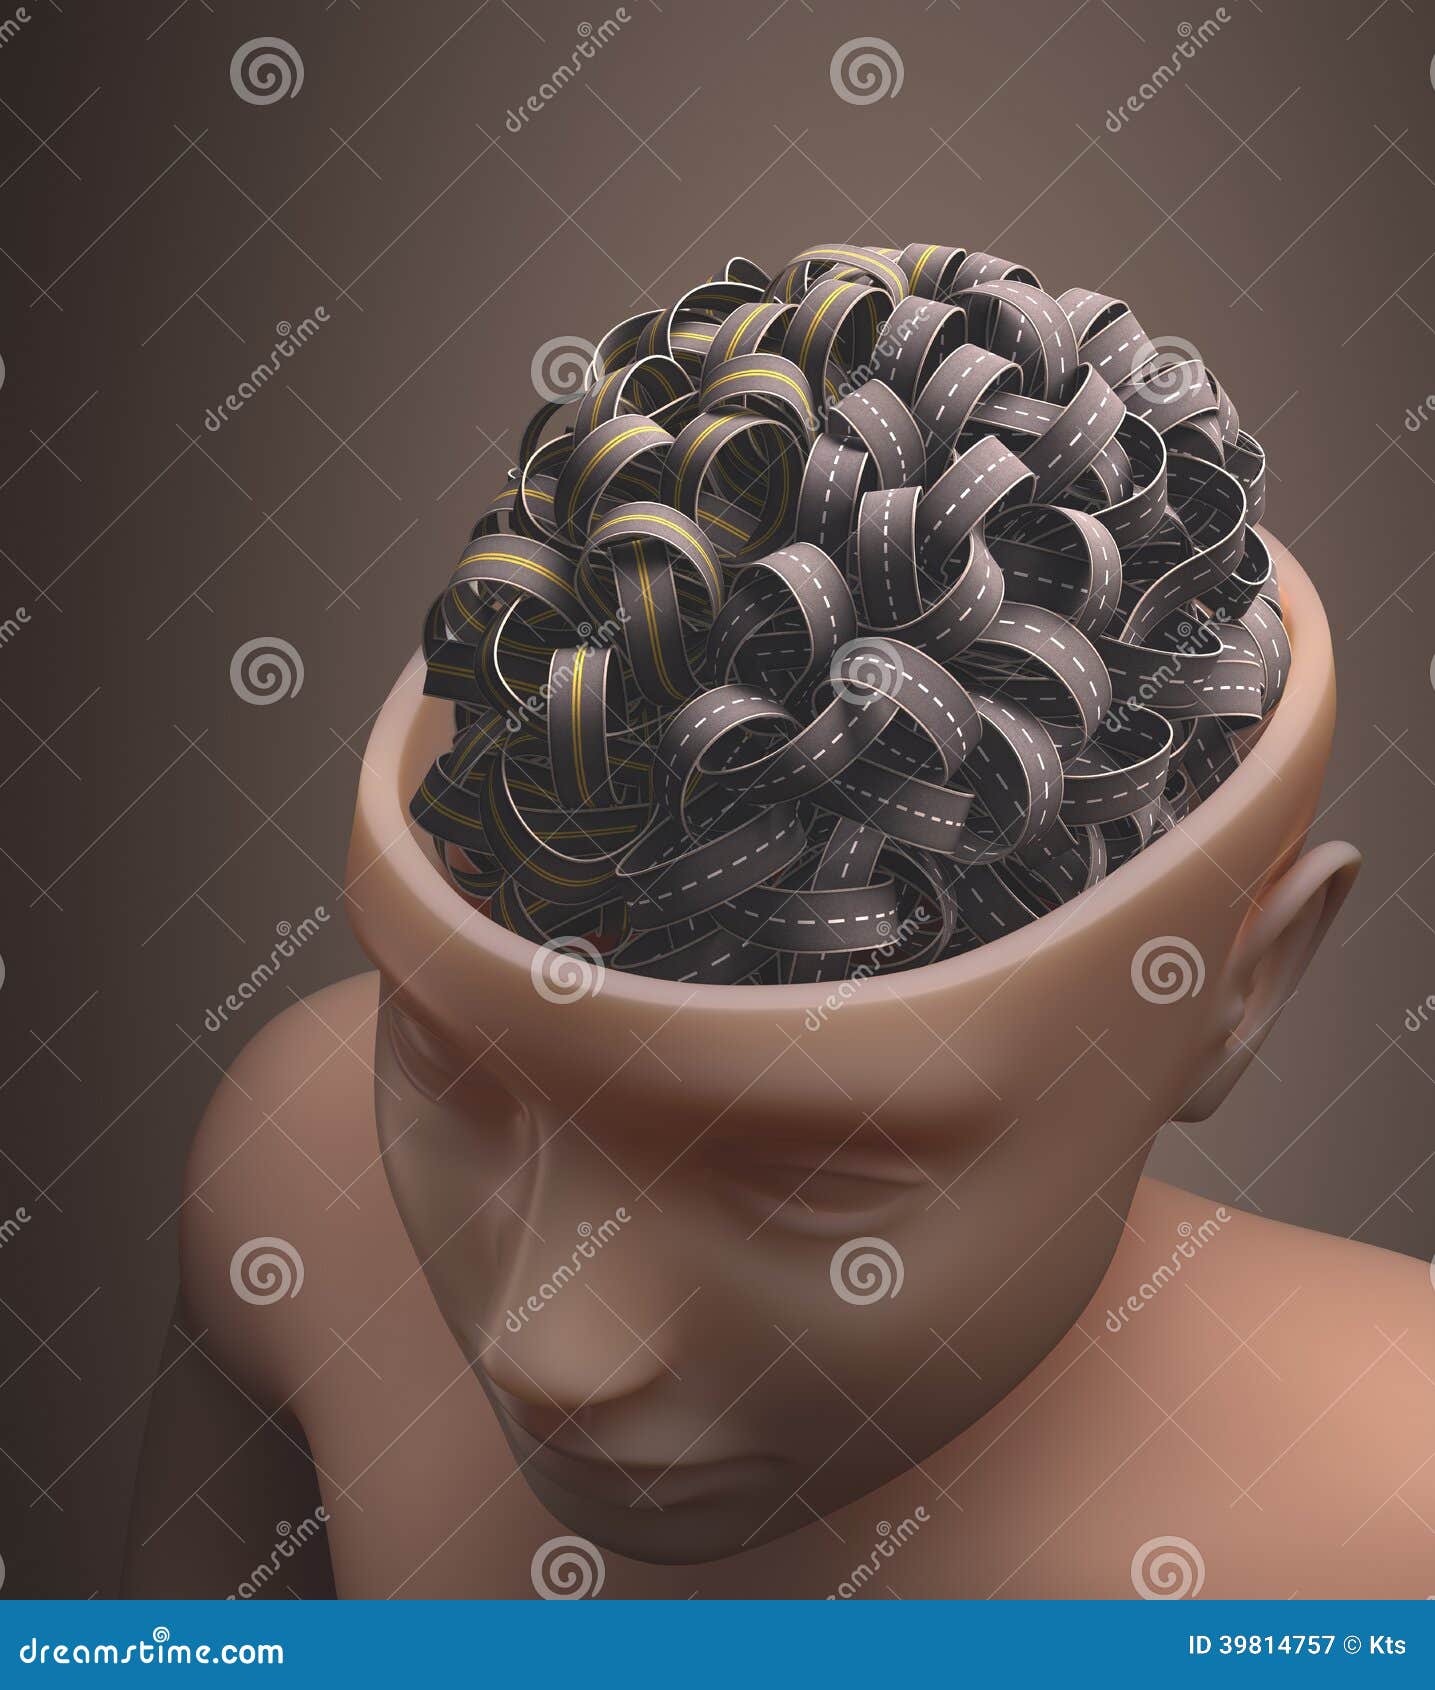 Highway Brain. Several highways intertwined forming a human brain. Concept of confused mind. Concept of the complexity of the human brain. Clipping path included.